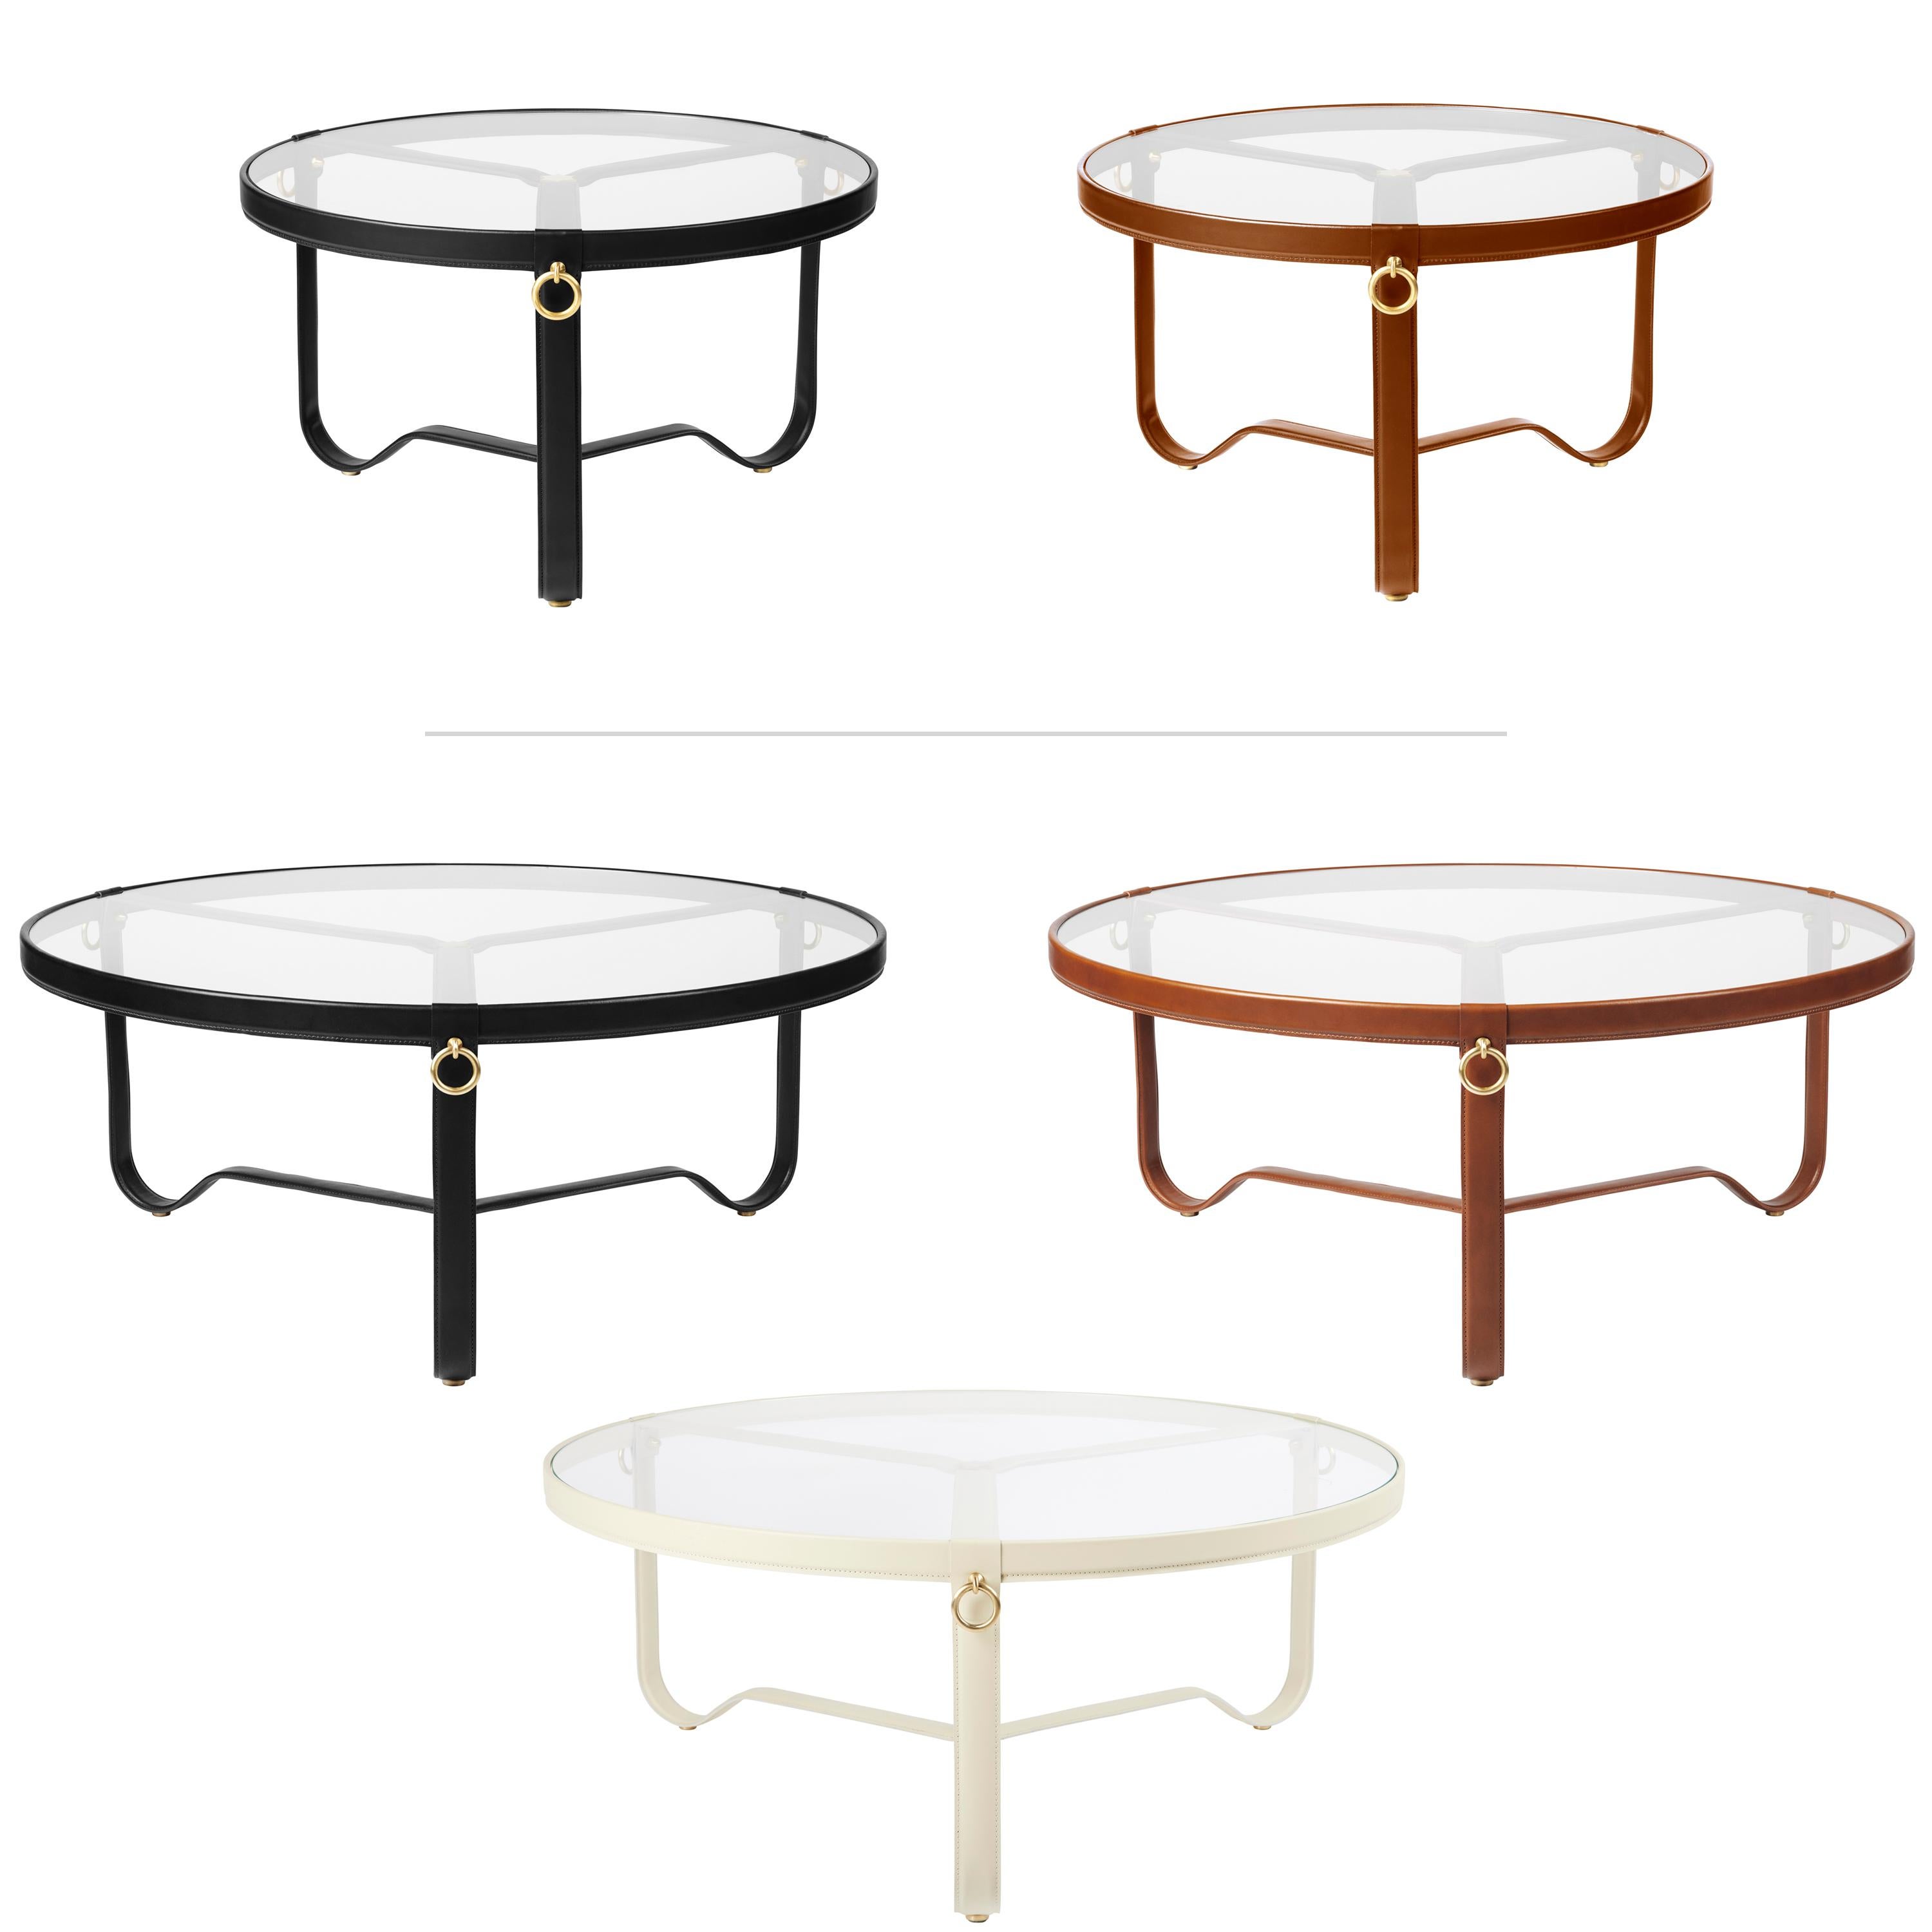 Danish Jacques Adnet 'Circulaire' Glass and Brown Leather Coffee or Side Table for GUBI For Sale